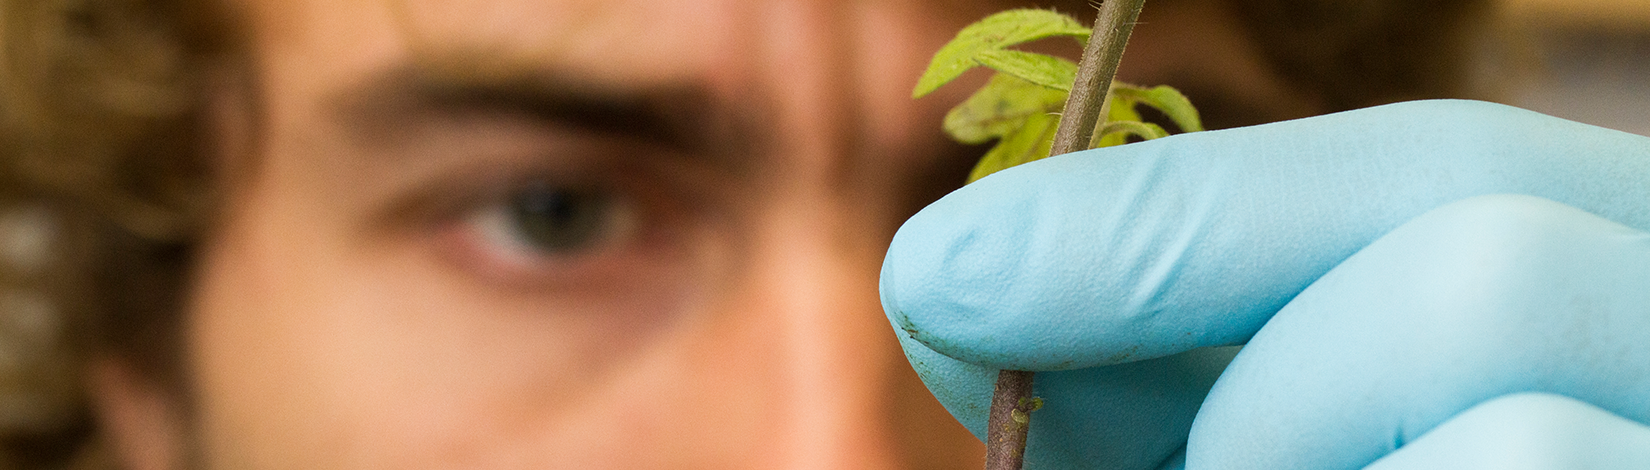 Zack Black, a horticulture sciences student, concentrates as he grafts two tomato plants together in Xin Zhao's lab. Photographed for the 2015 Research Discoveries report.